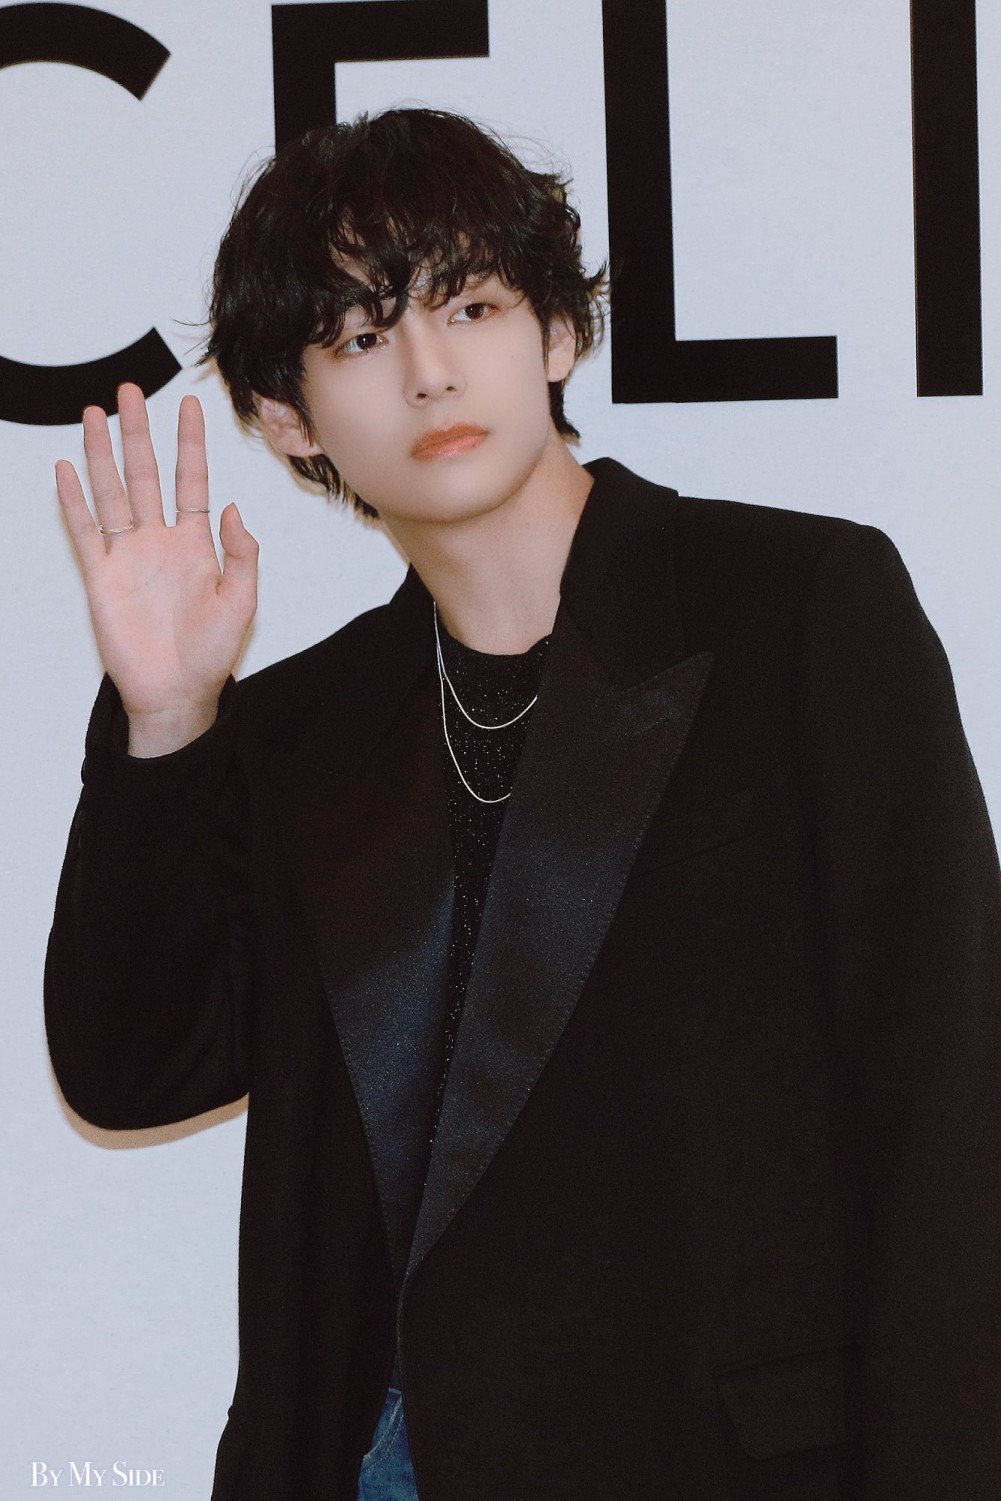 BTS's V (Kim Taehyung) tops trends worldwide as he attends CELINE's Pop-Up  Store in Seoul as his first official activity as Global Ambassador